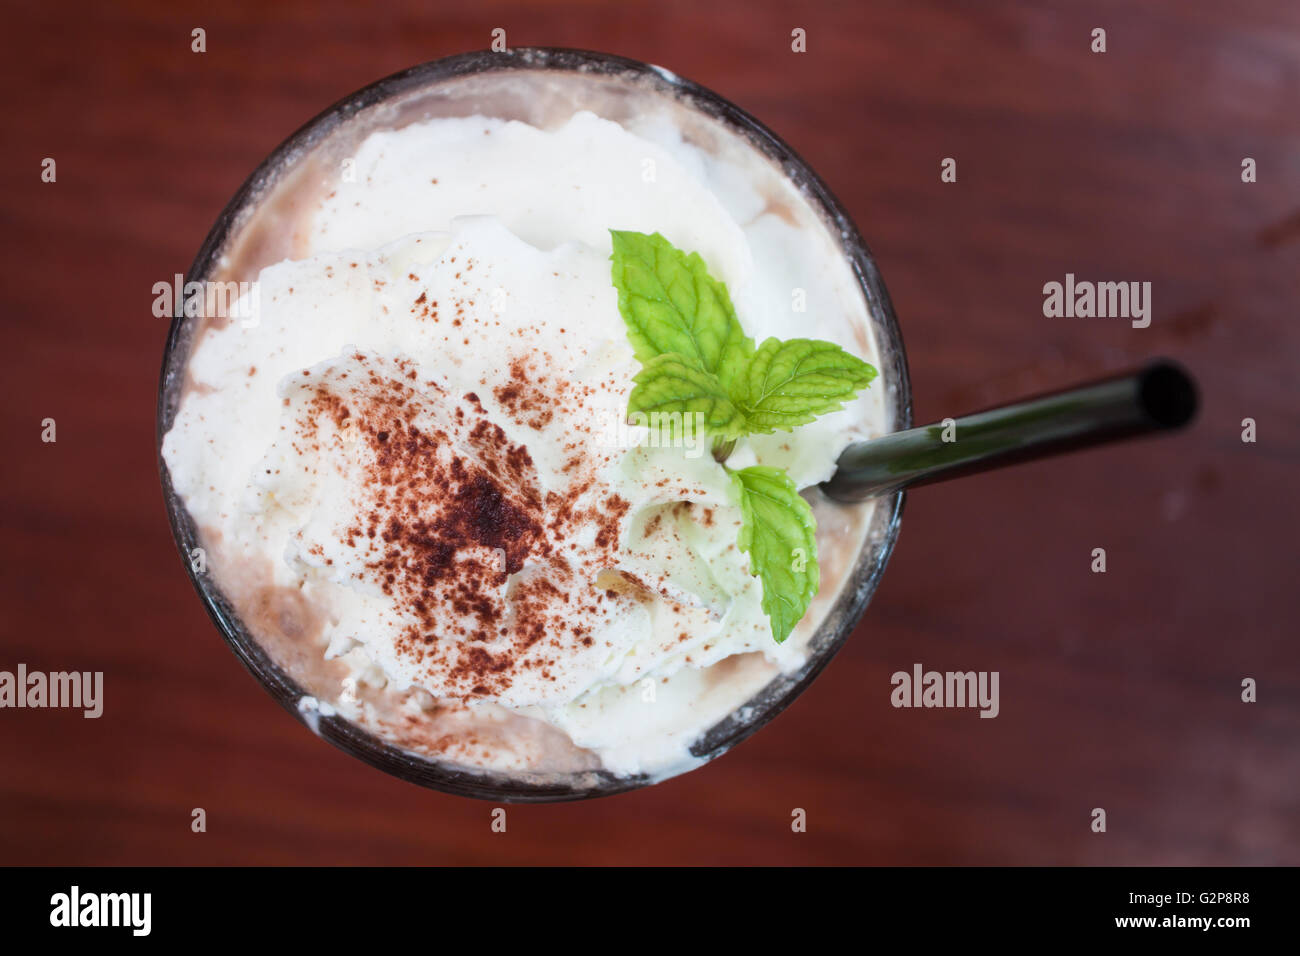 Iced coffee toping with whipped cream, stock photo Stock Photo